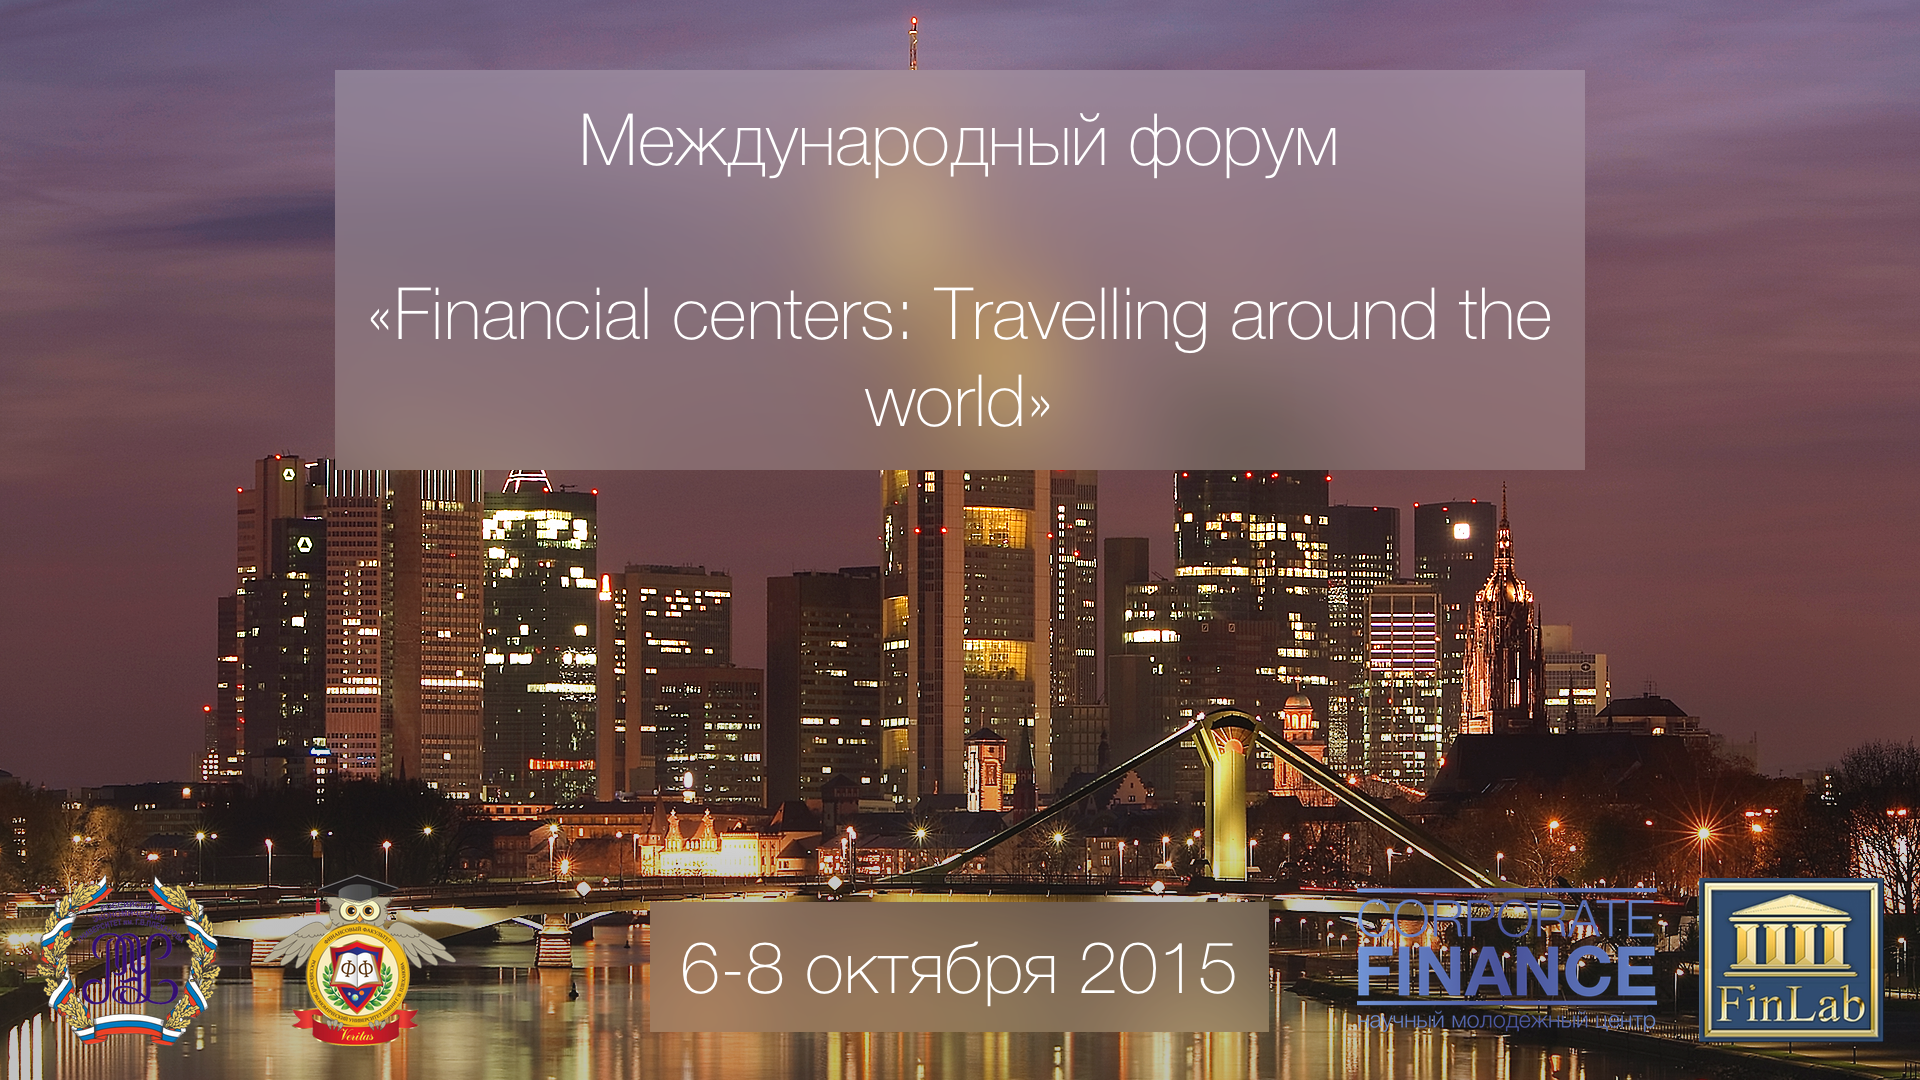 What International Financial Centers can you name. Travel centre